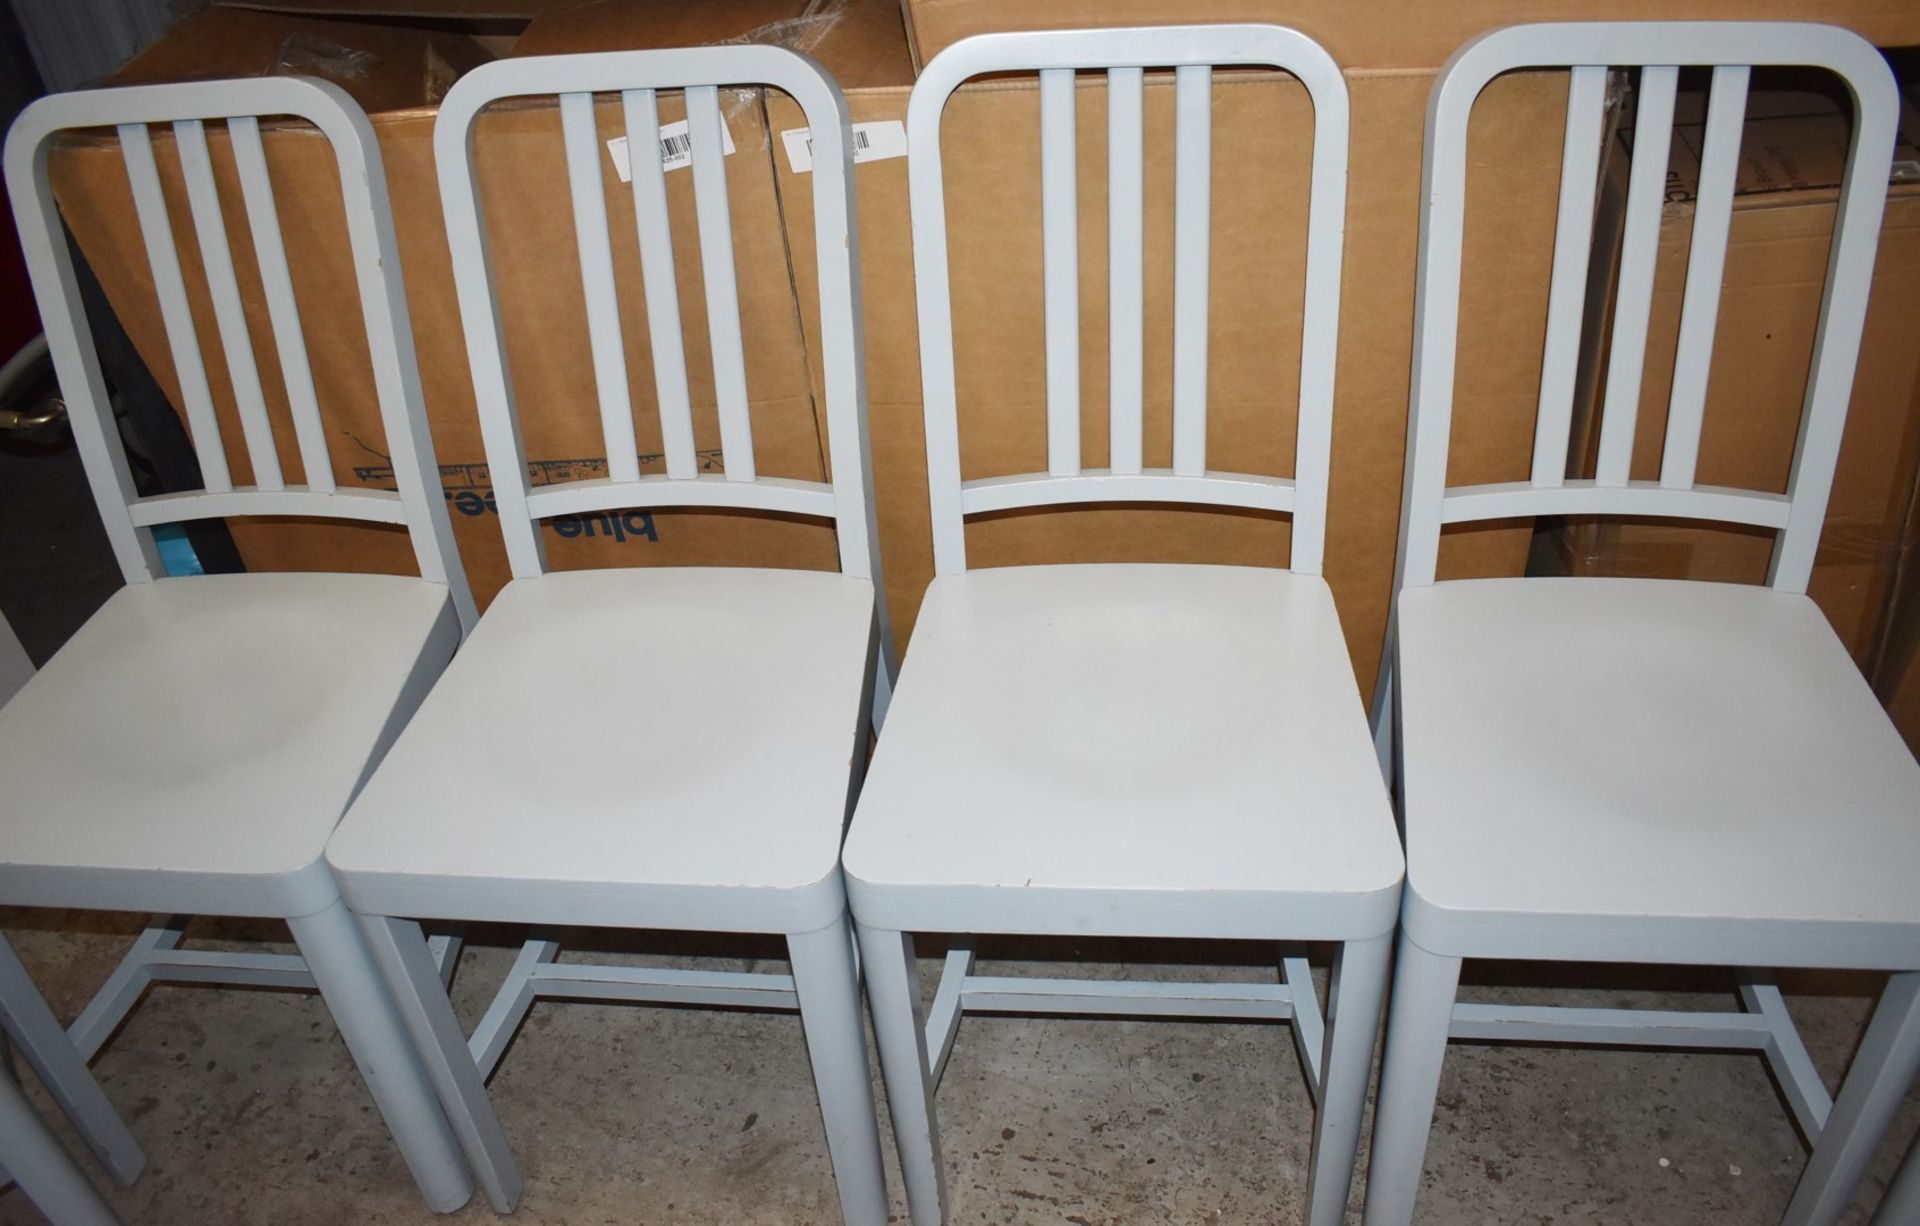 6 x Designer Billiani CO2 Contemporary Wooden Dining Chairs - Designed By Aldo Cibic - Made in Italy - Image 3 of 15